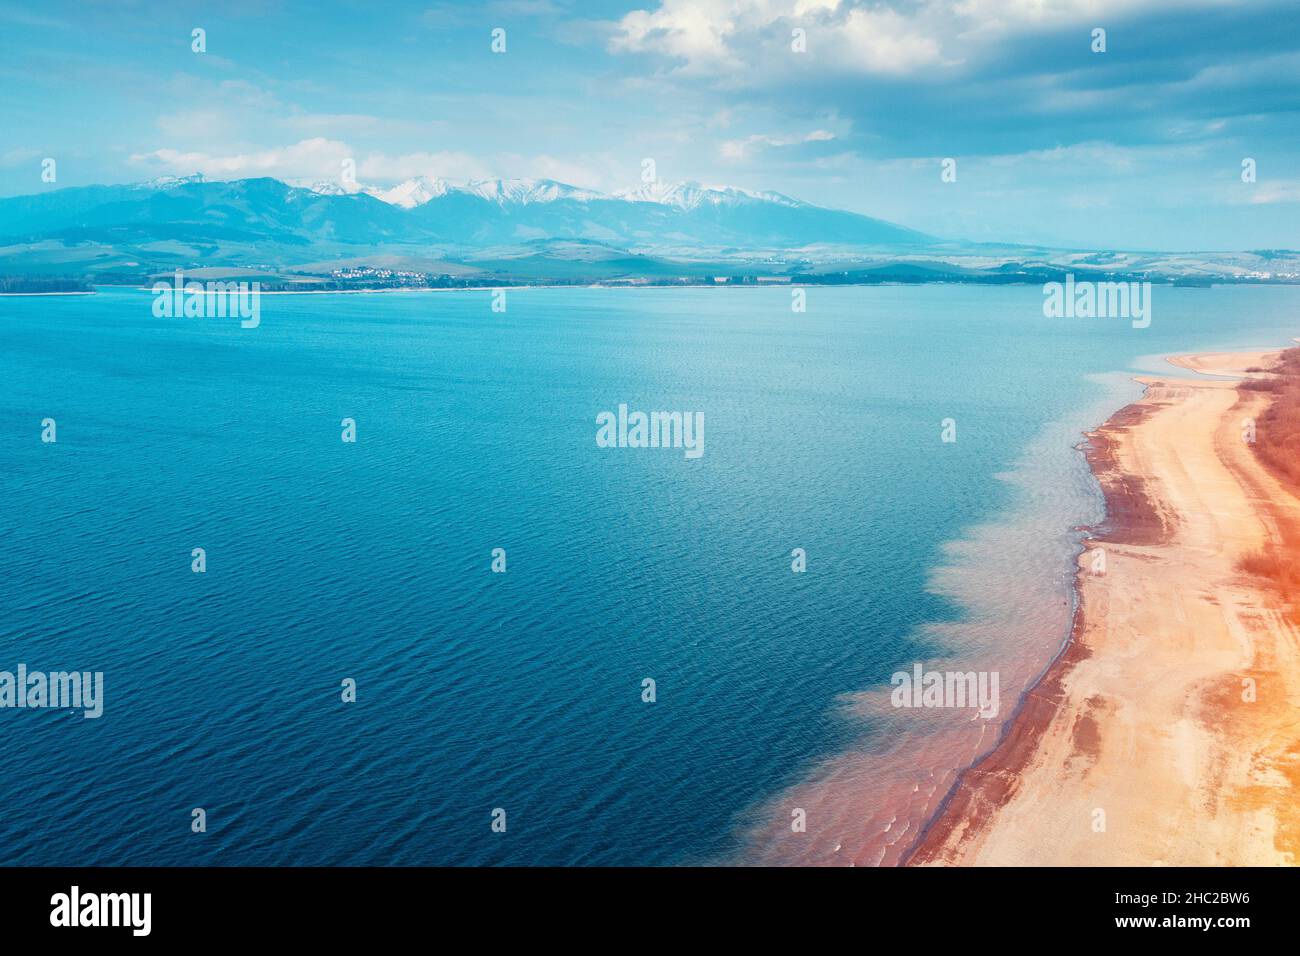 Beautiful lake surrounded by mountains in early spring. Liptov sea, Slovak Republic, Europe Stock Photo